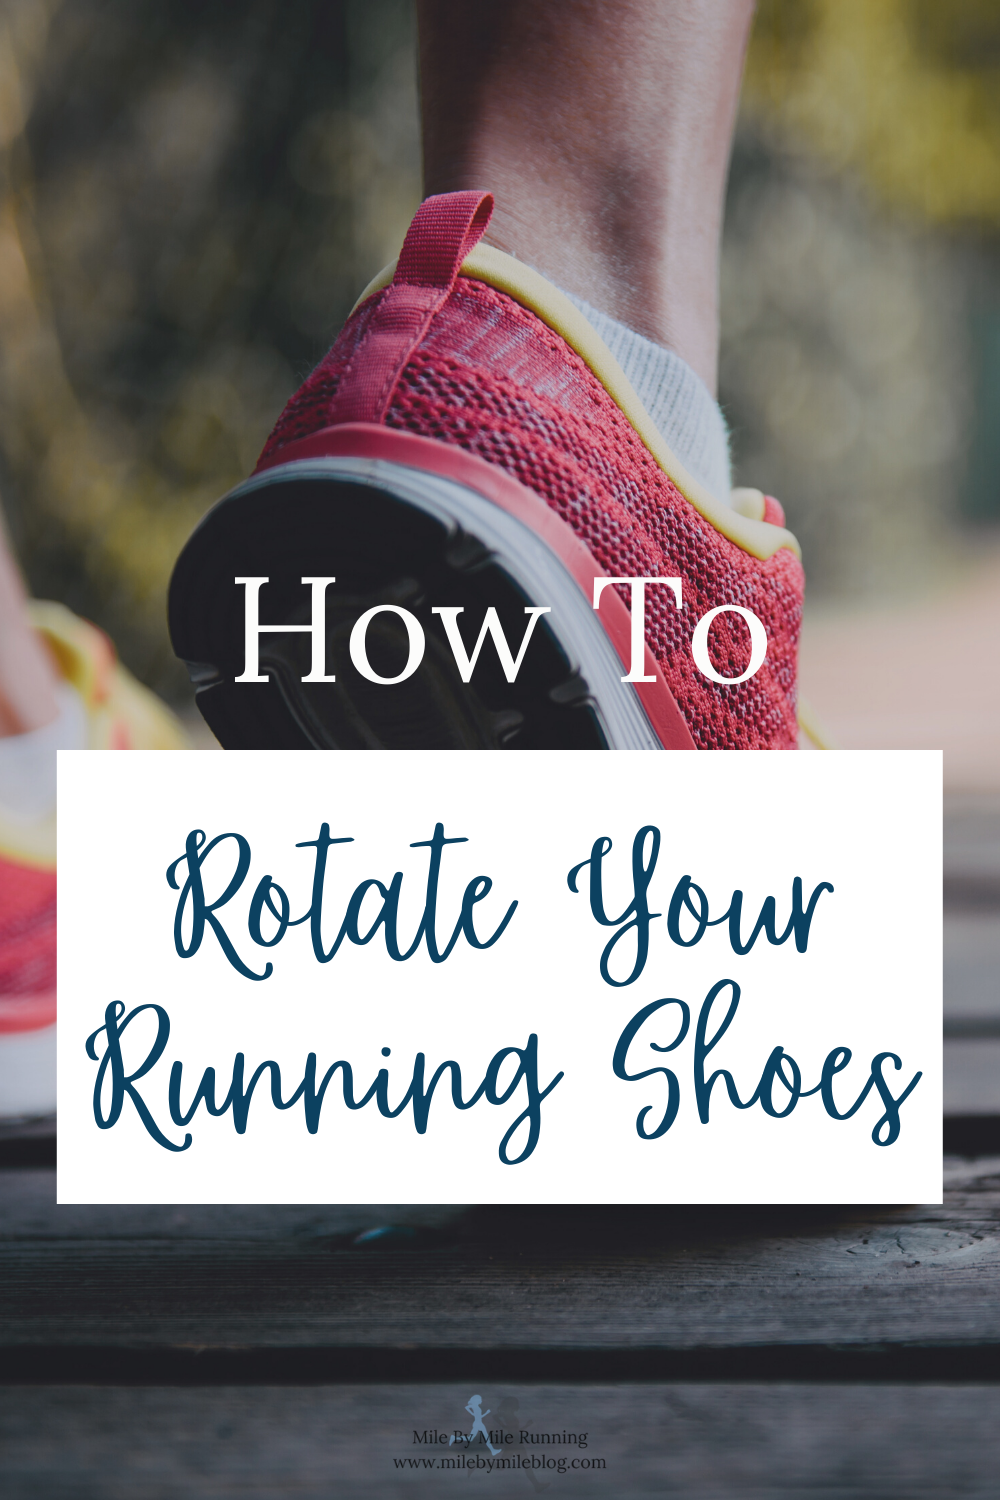 Do you have multiple pairs of running shoes, or do you run in the same shoes day after day? There are some advantages to having more than one pair of running shoes and rotating them throughout the week. But how exactly do you rotate your running shoes in an effective way? Here are some ideas to consider when you have multiple pairs of running shoes.